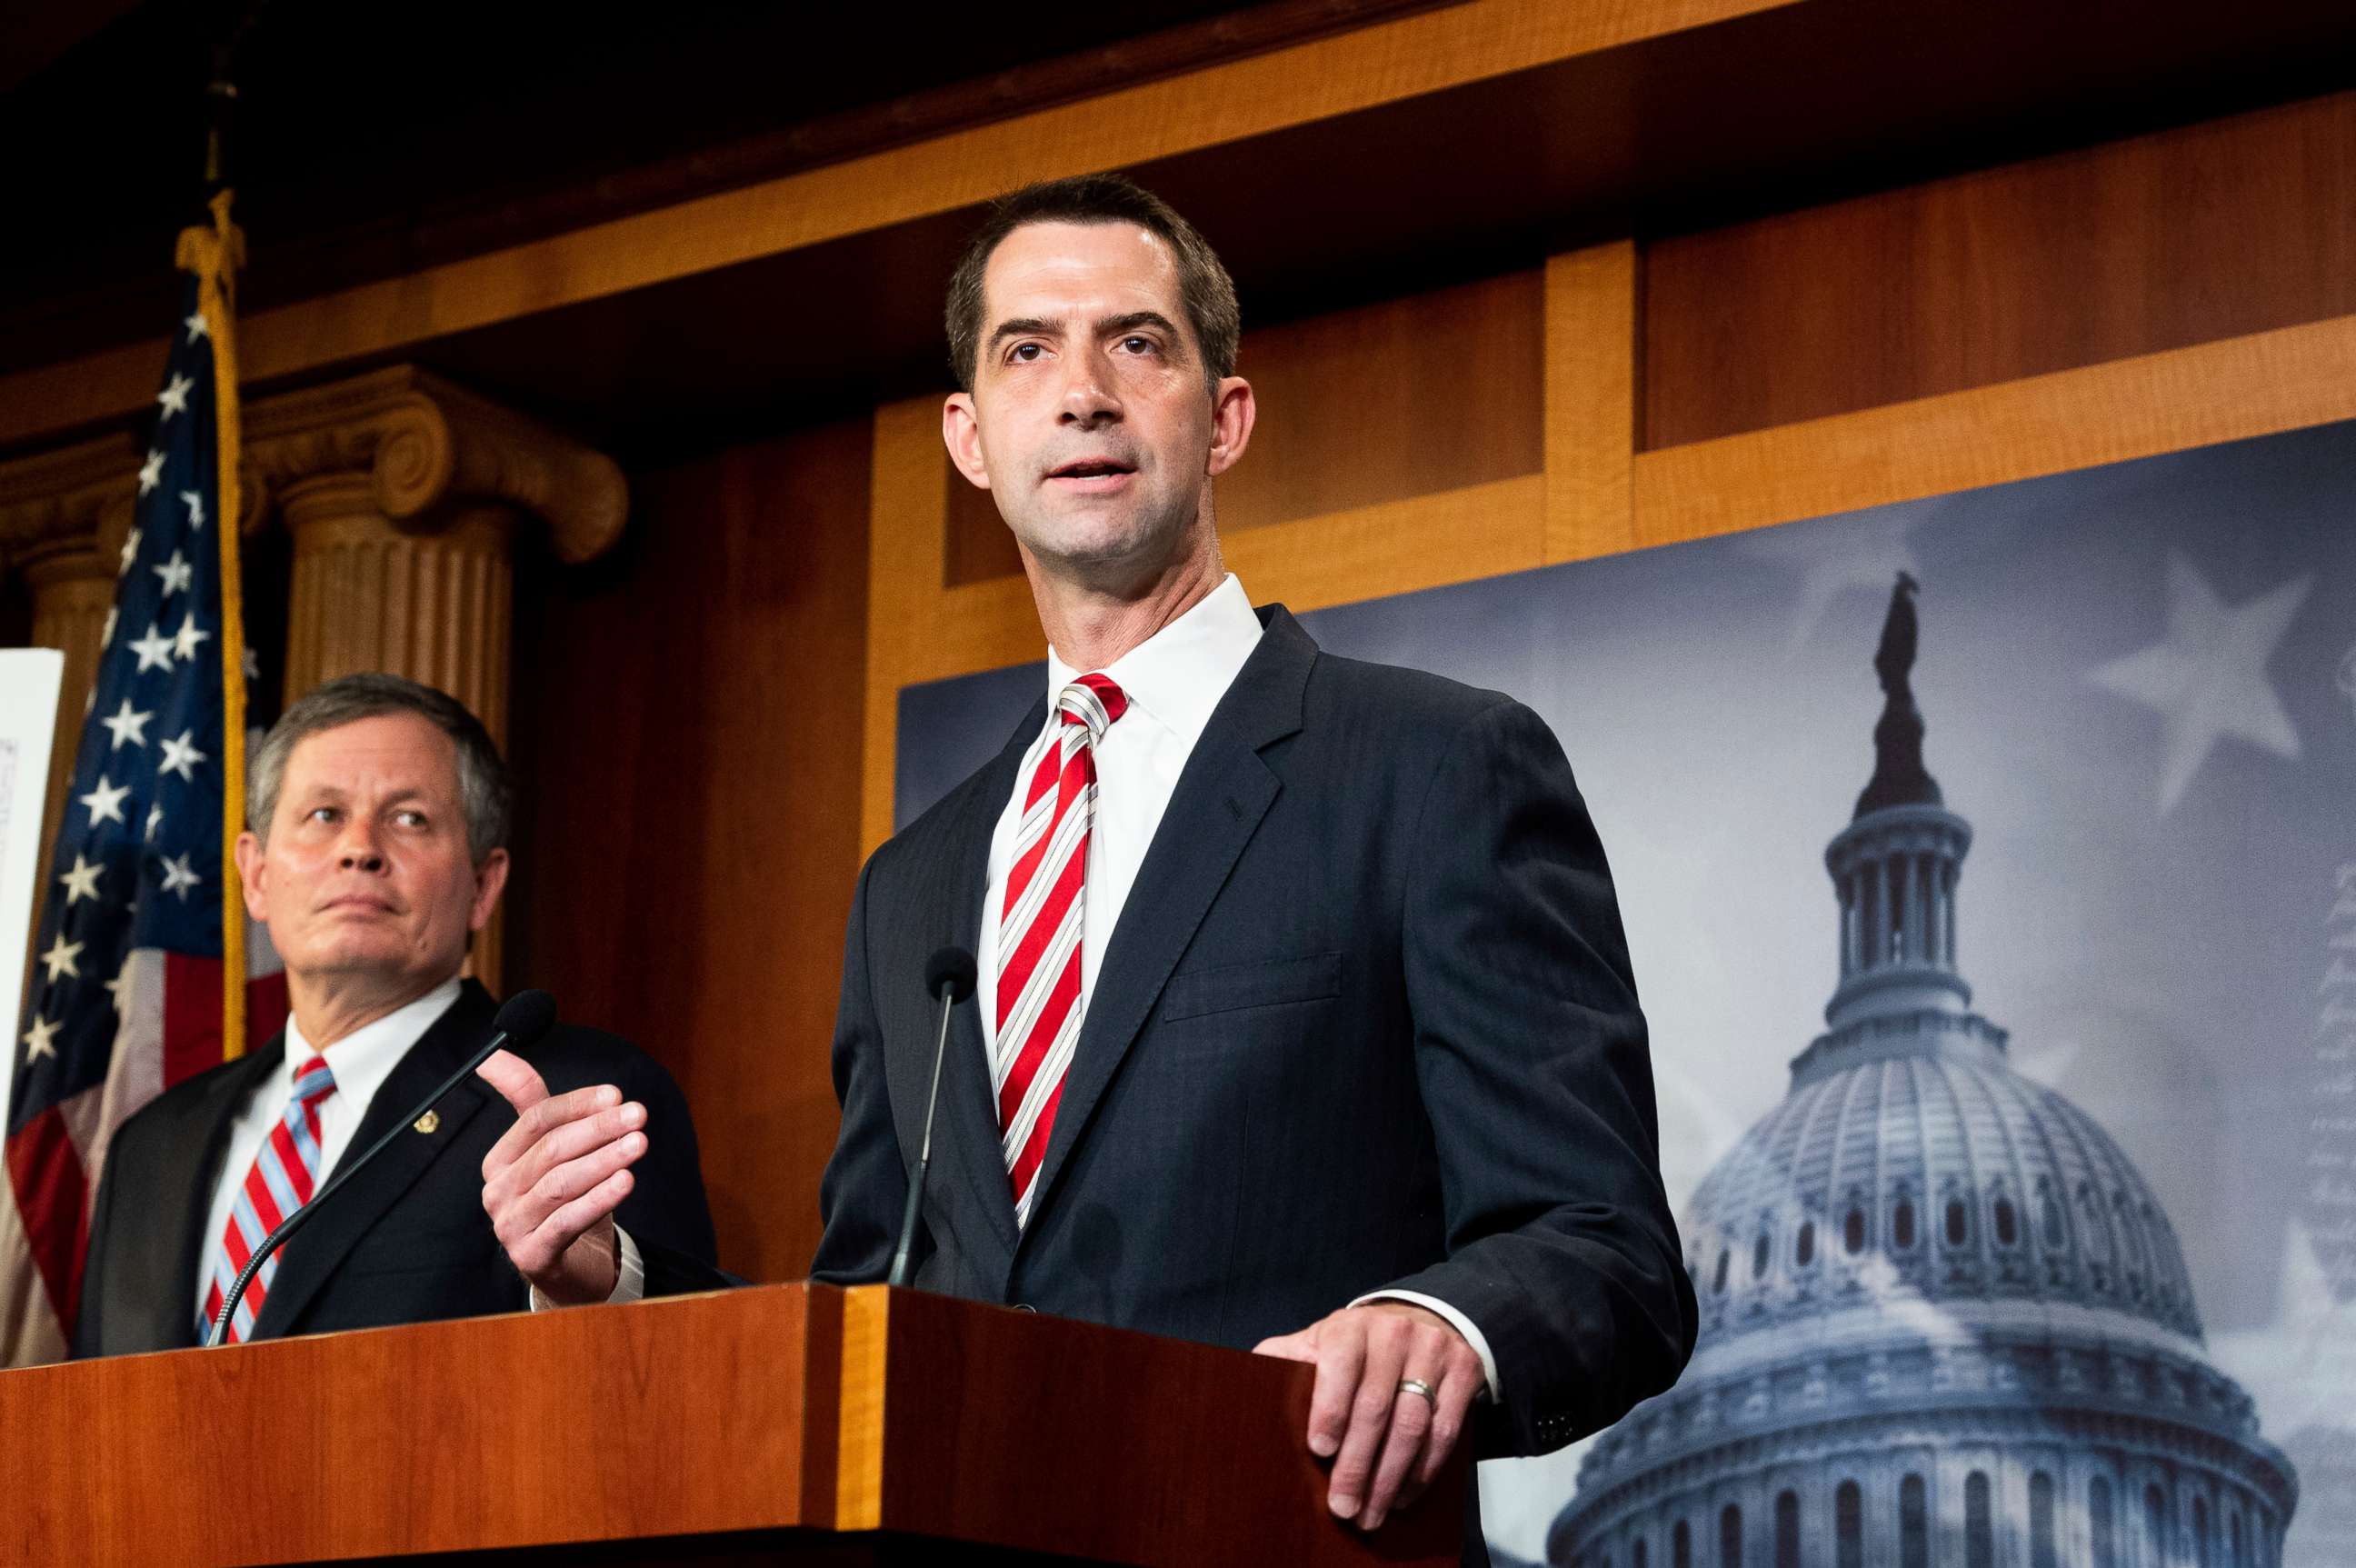 PHOTO: Senator Tom Cotton speaks at a press conference against the District of Columbia becoming a state.